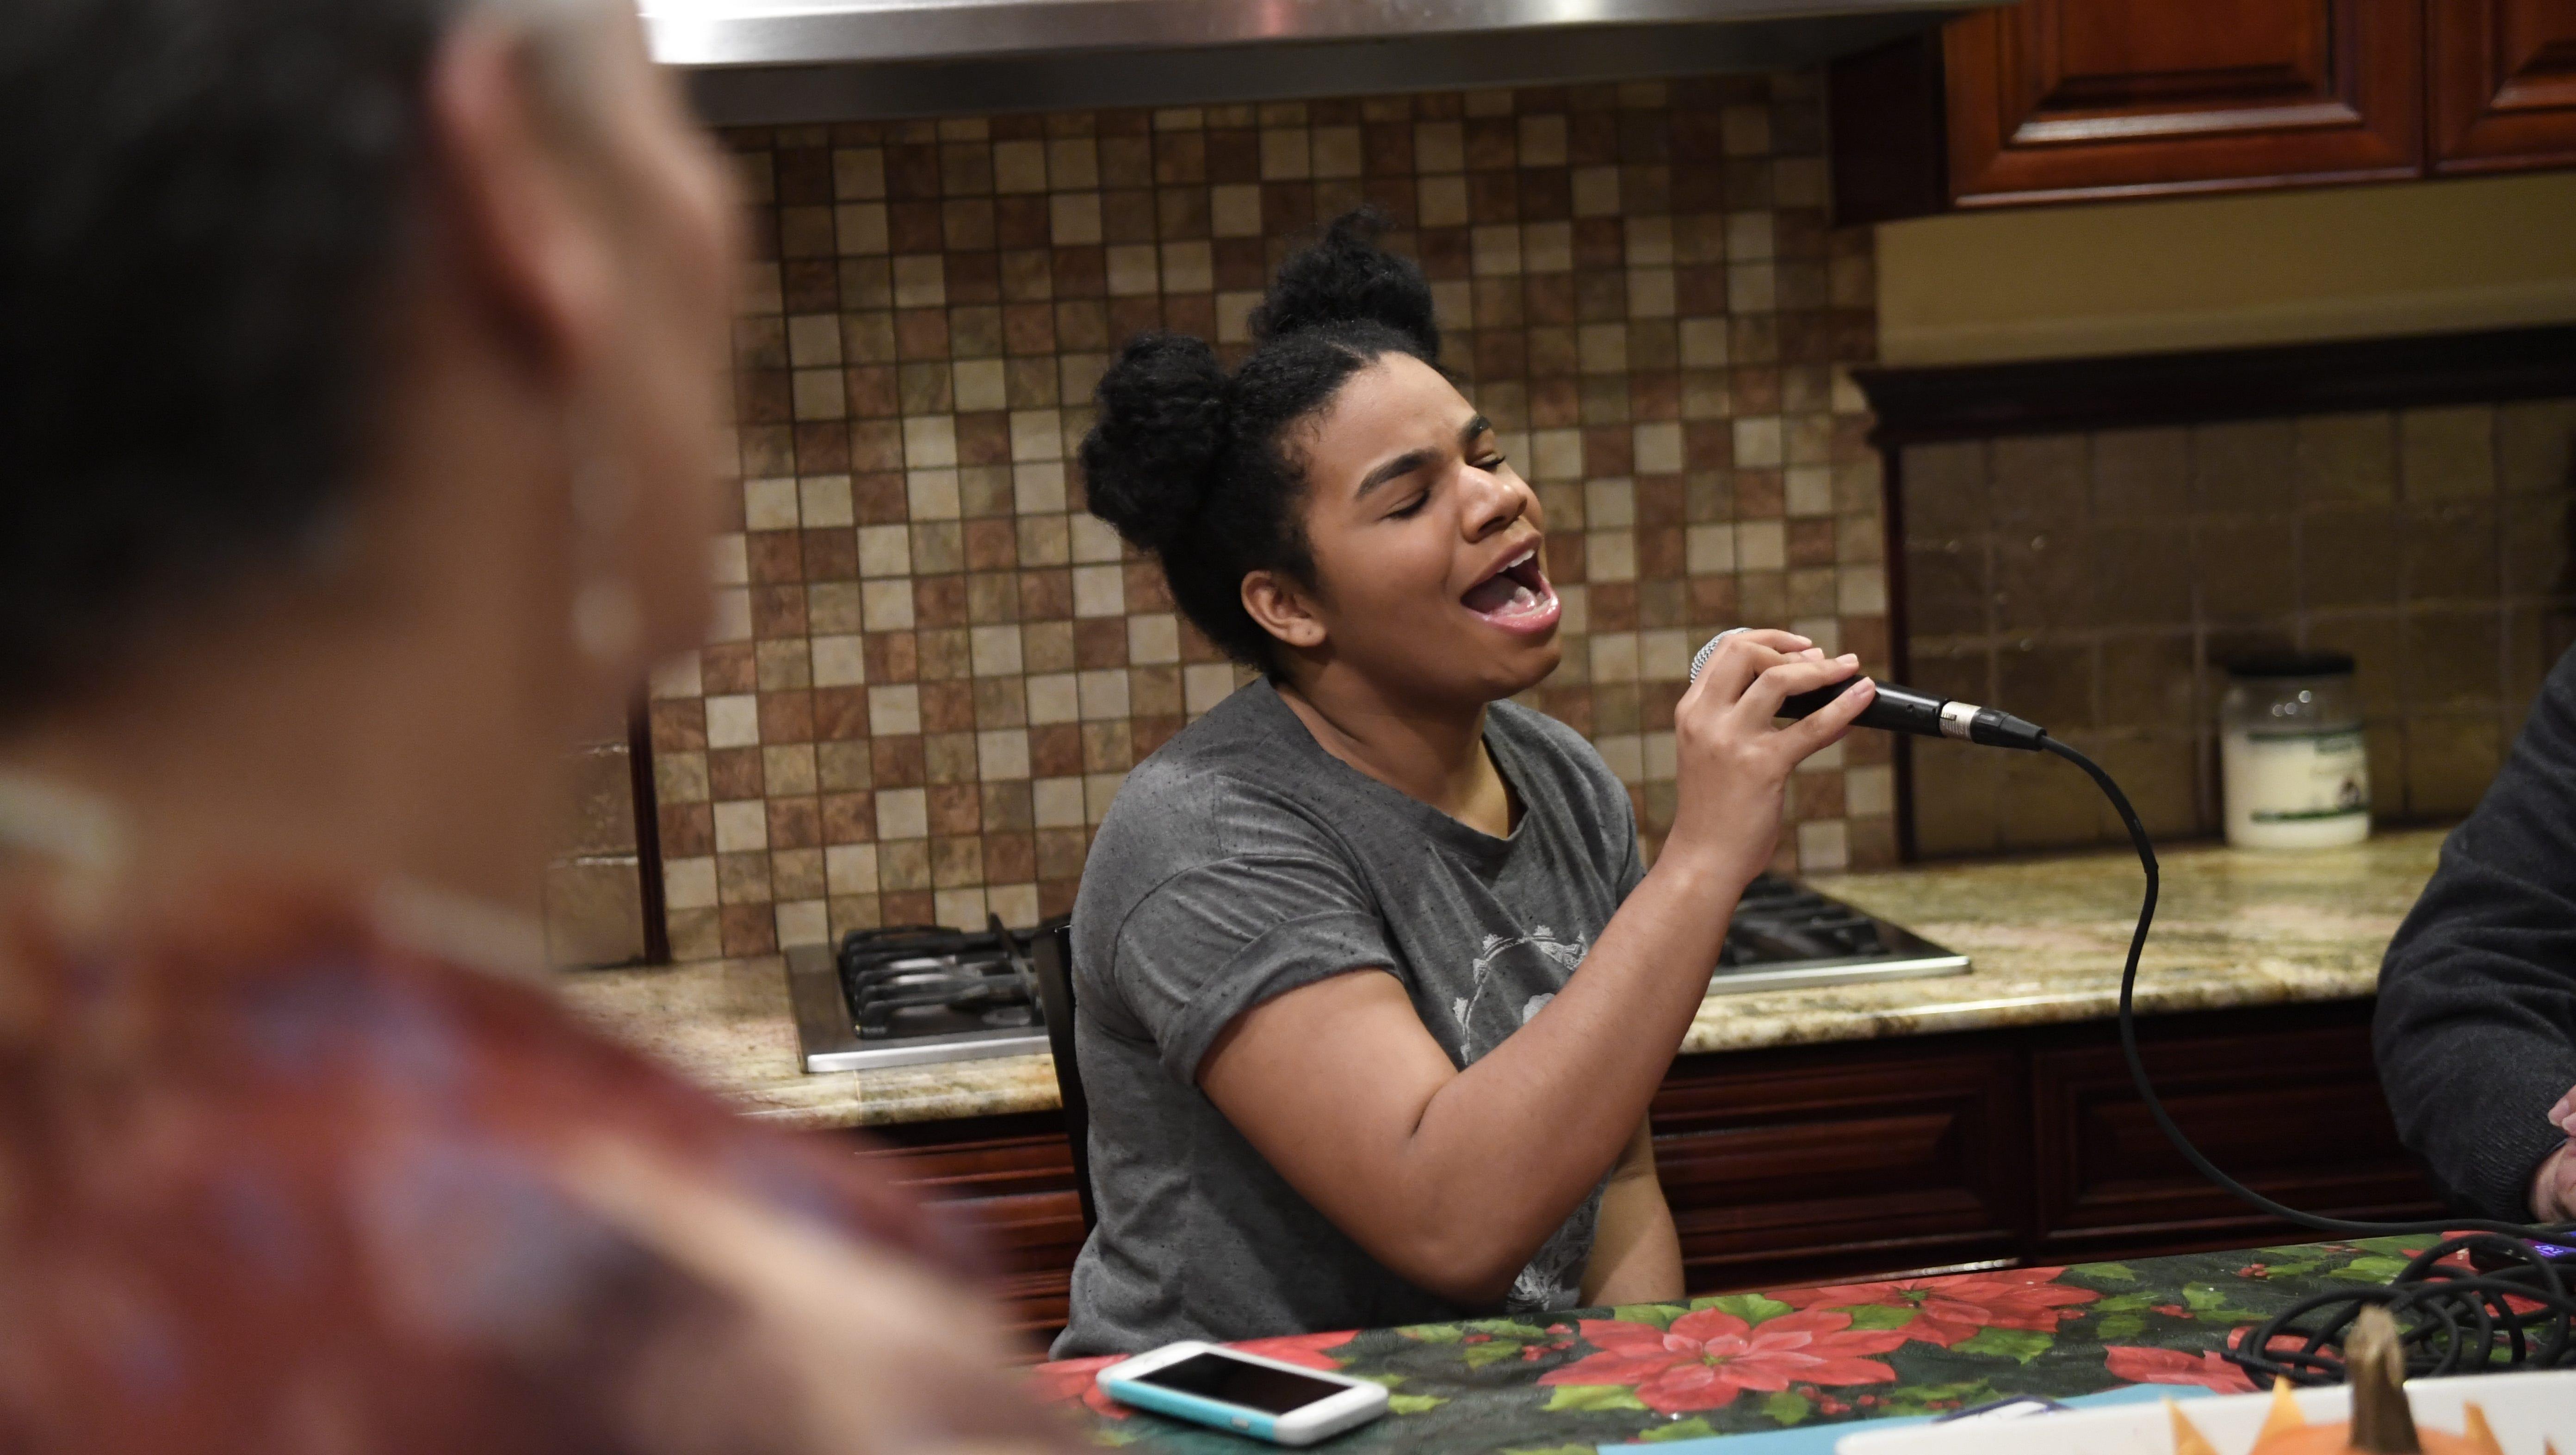 Jaqueline McDonald, left, listens to her daughter Wé as she sings in the kitchen of their home in Paterson.